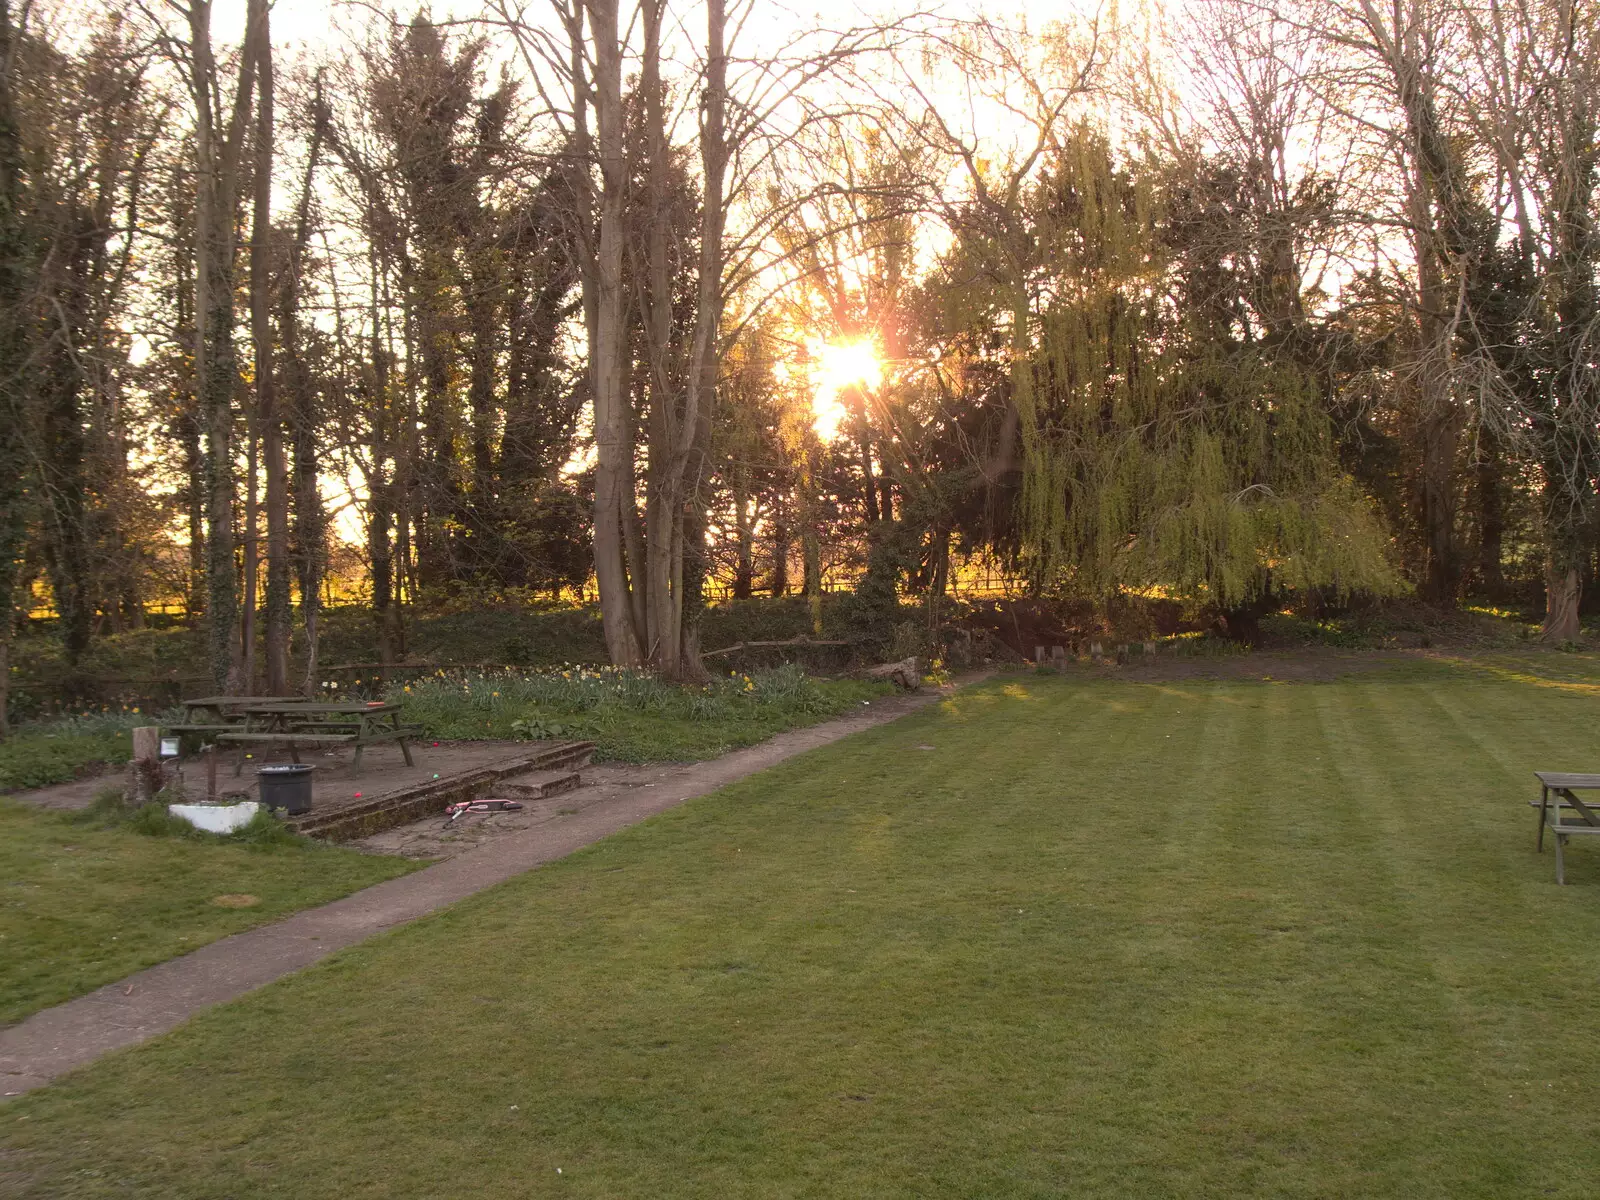 The sun sets, taking any warmth with it, from BSCC Beer Garden Hypothermia, Hoxne and Brome, Suffolk - 22nd April 2021